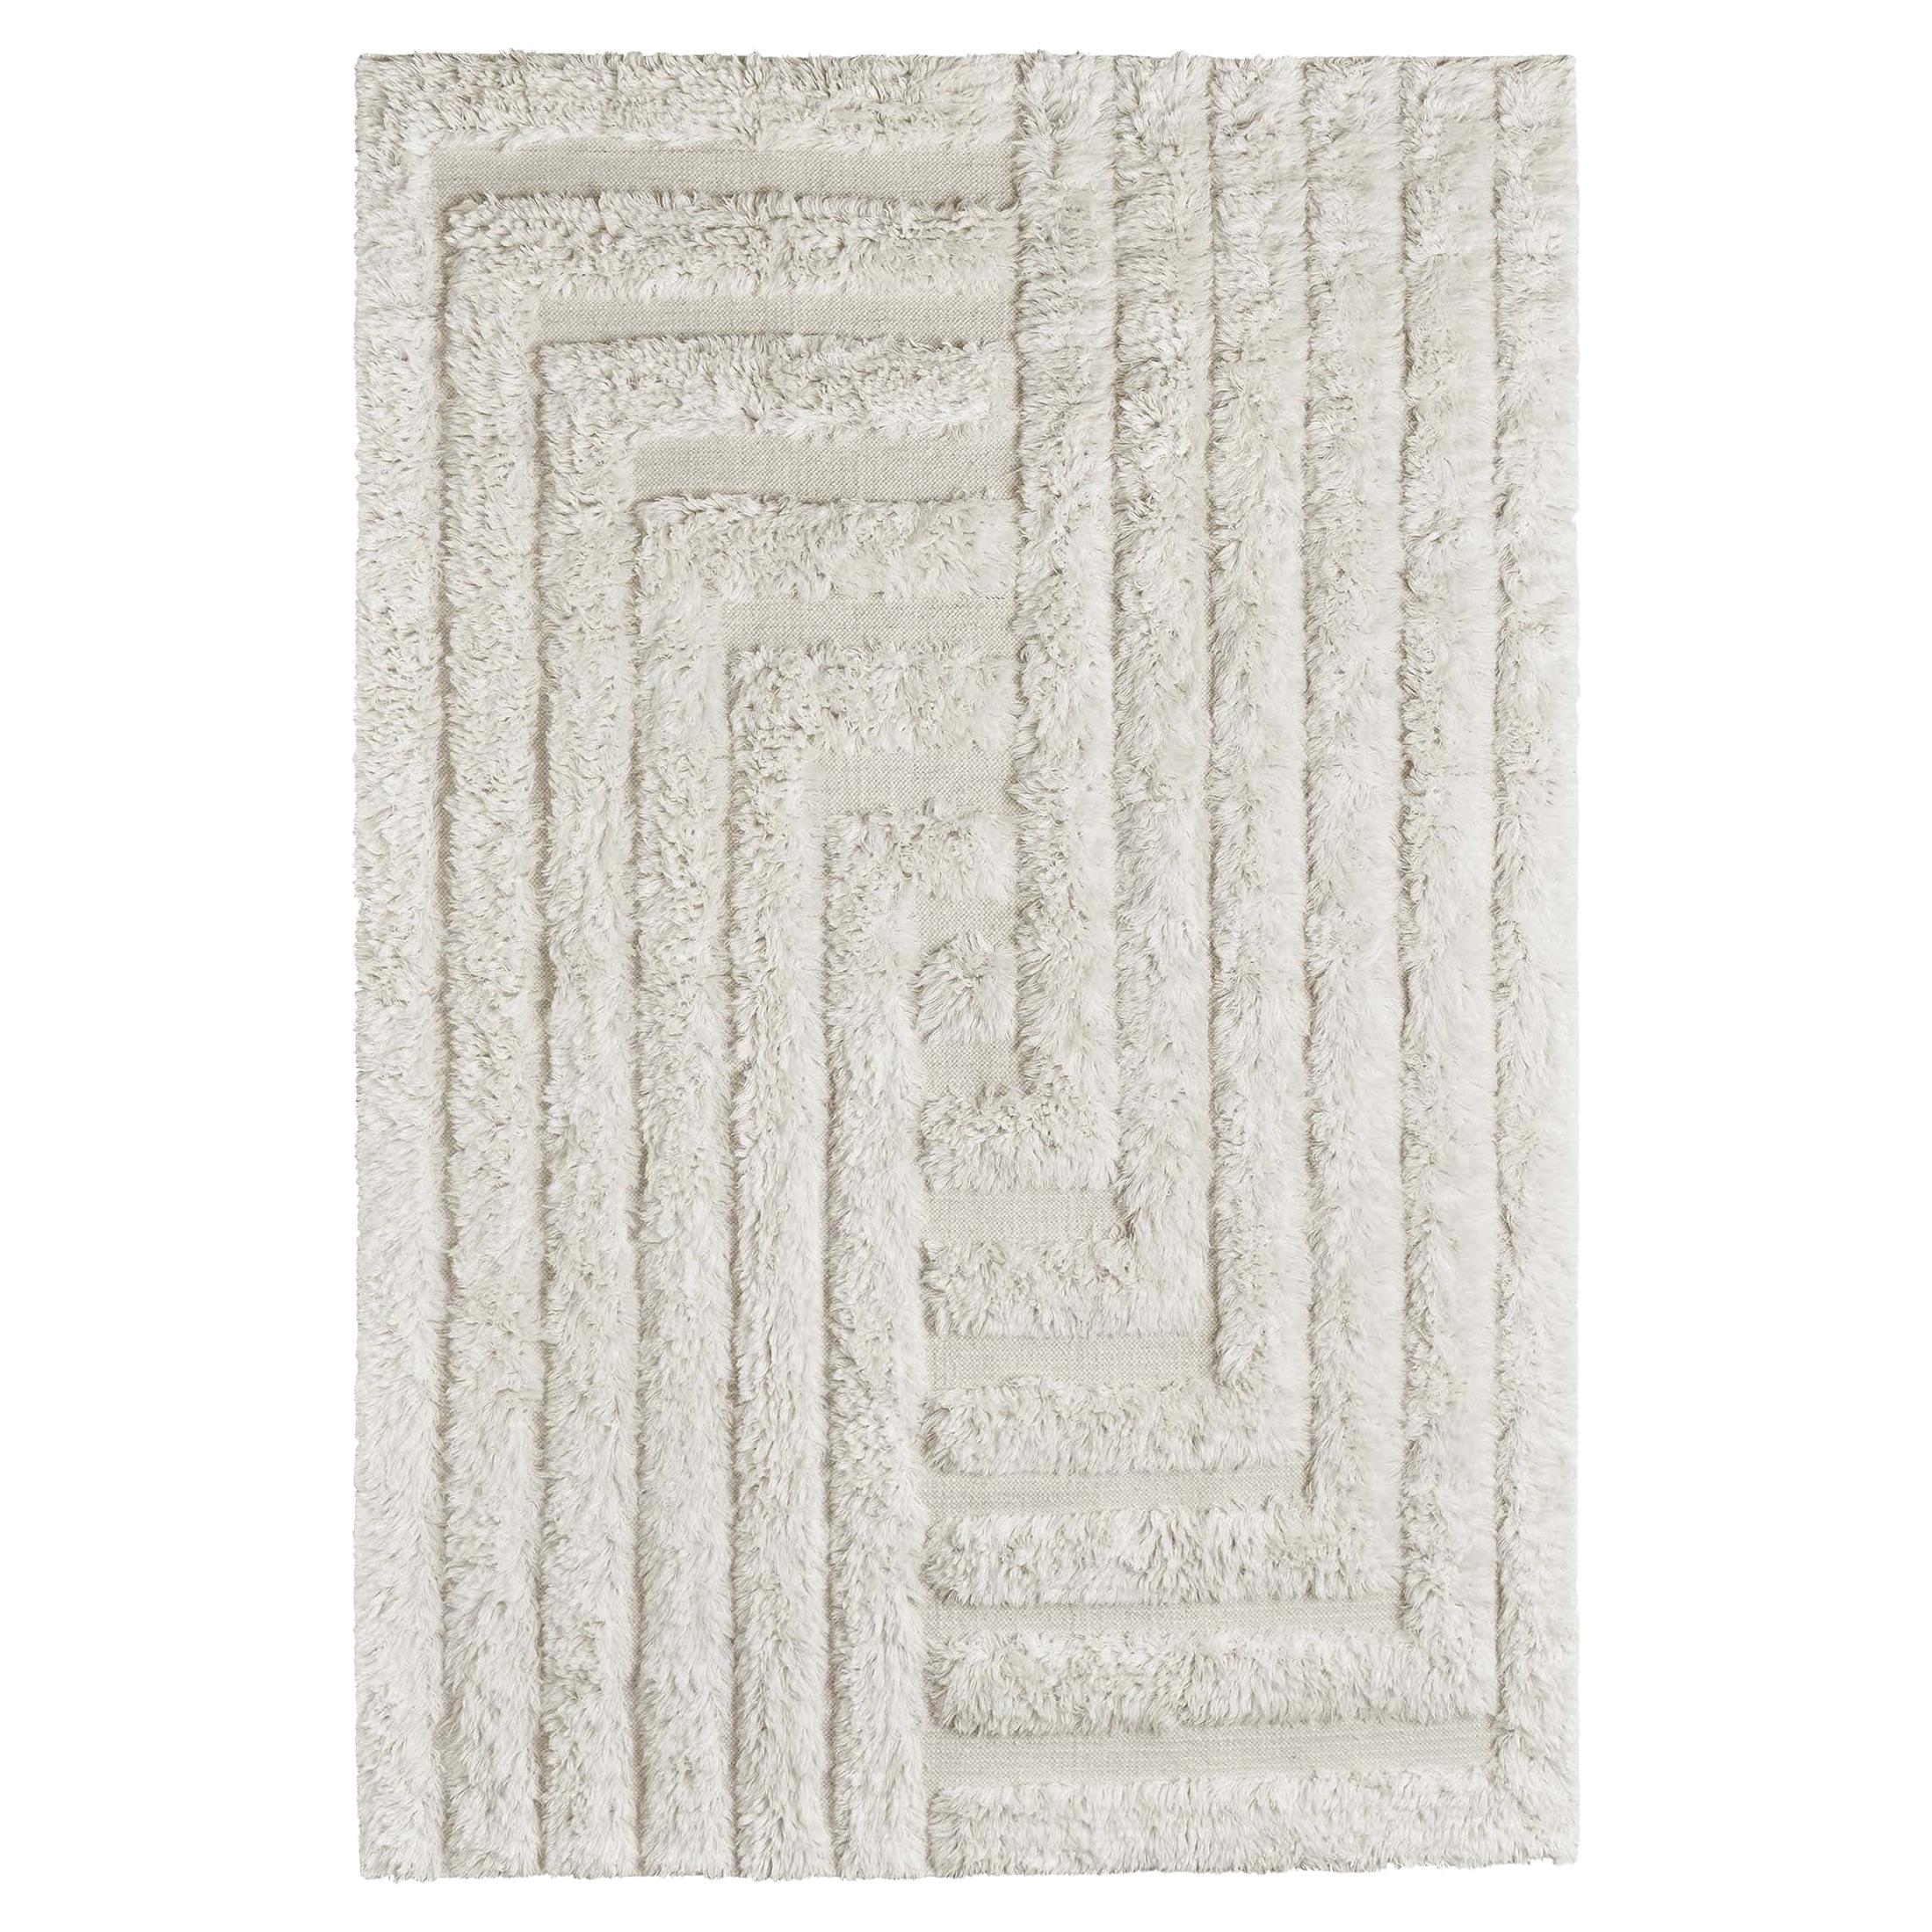 Handwoven Shaggy Labyrinth Wool Rug White Medium For Sale